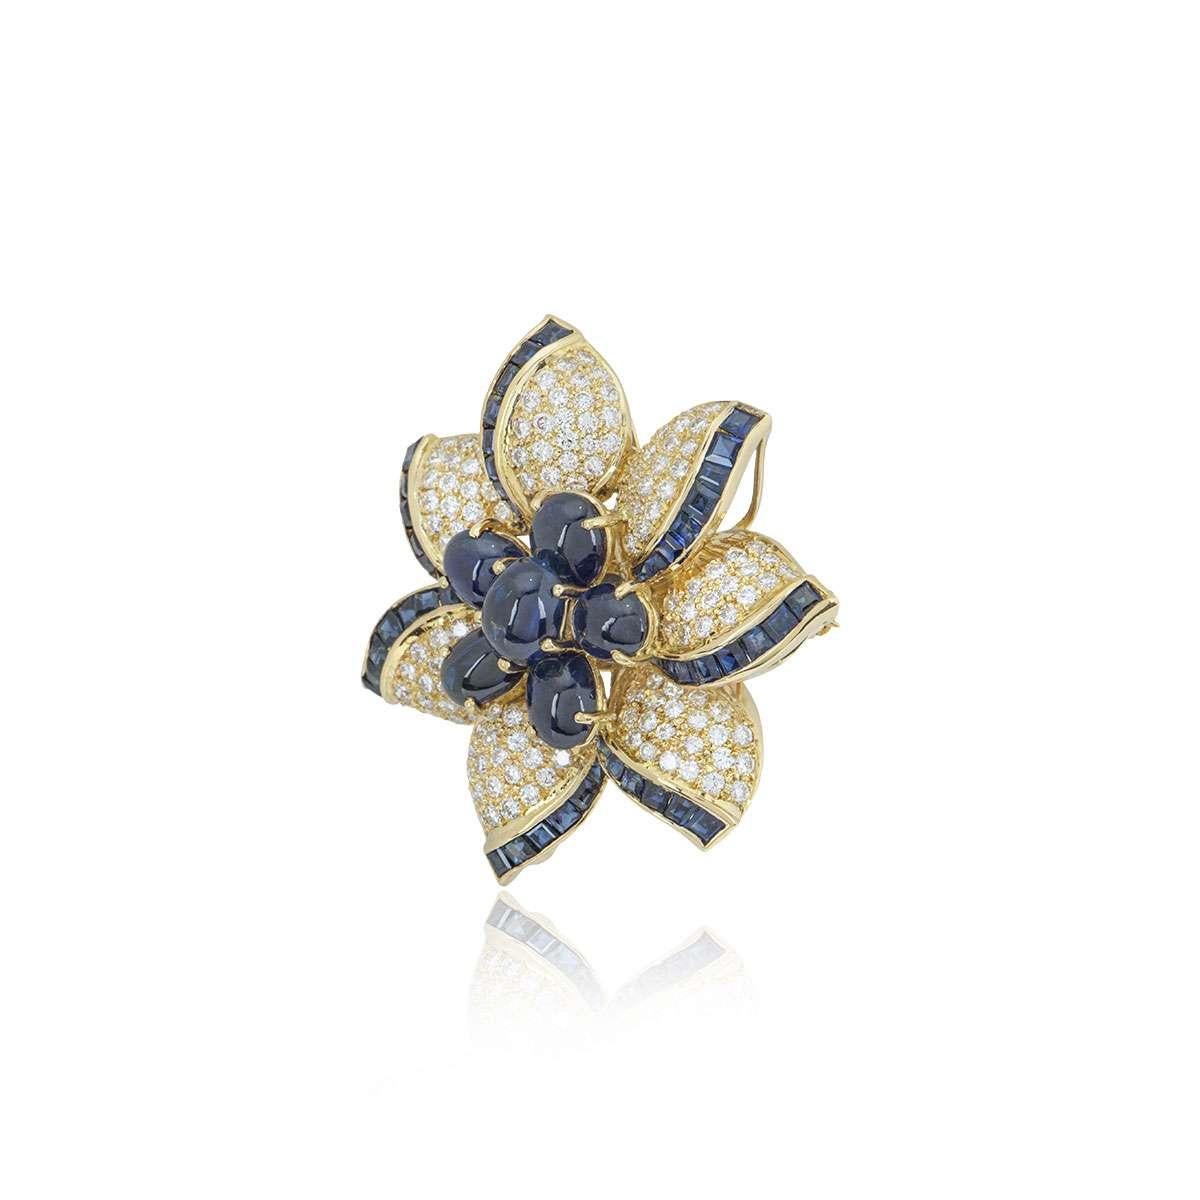 An 18k yellow gold diamond and sapphire brooch. The brooch is designed as a flower with round brilliant cut diamonds and square cut sapphires set in the petals and cabochon cut sapphires in the centre. The diamonds have a total weight of